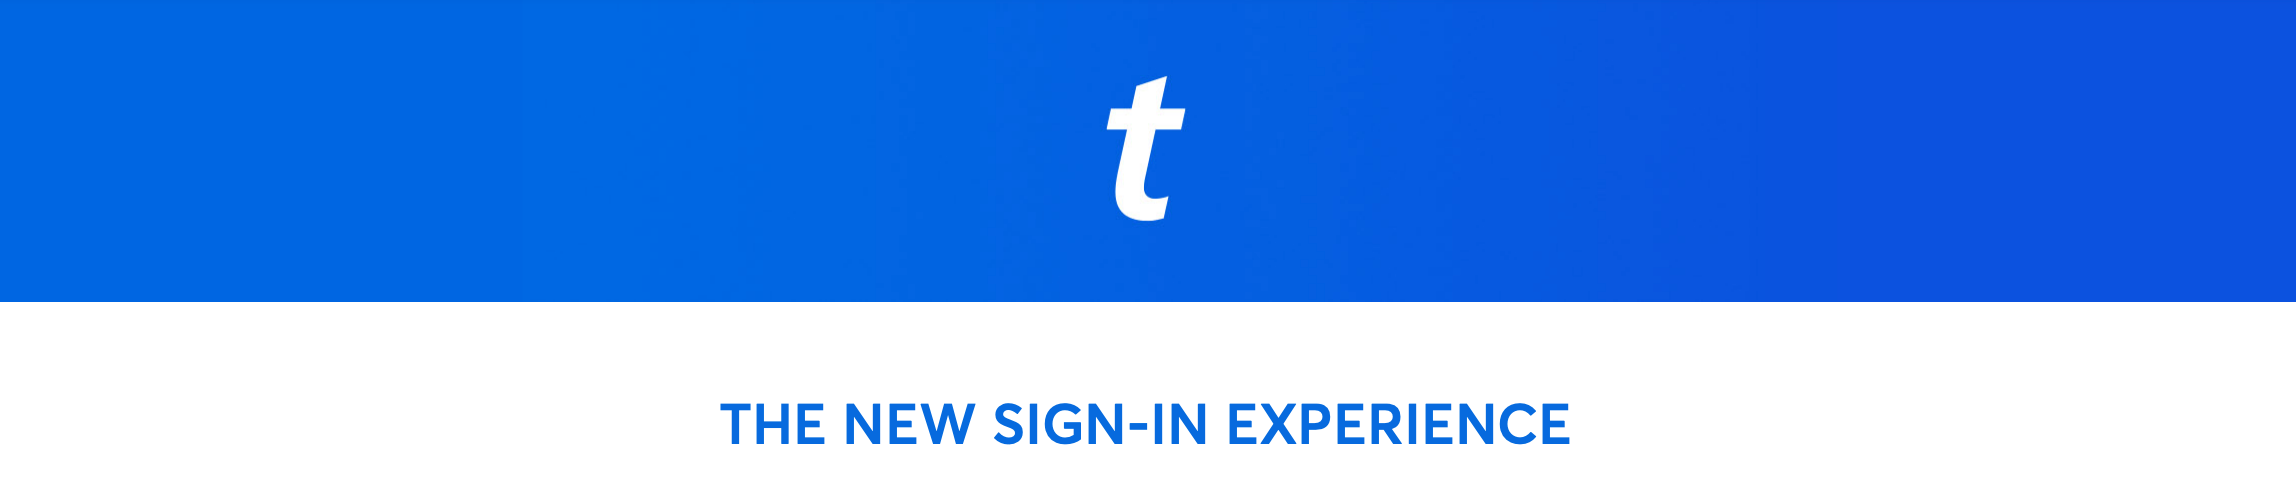 The-New-TM-Sign-In-Experience.png